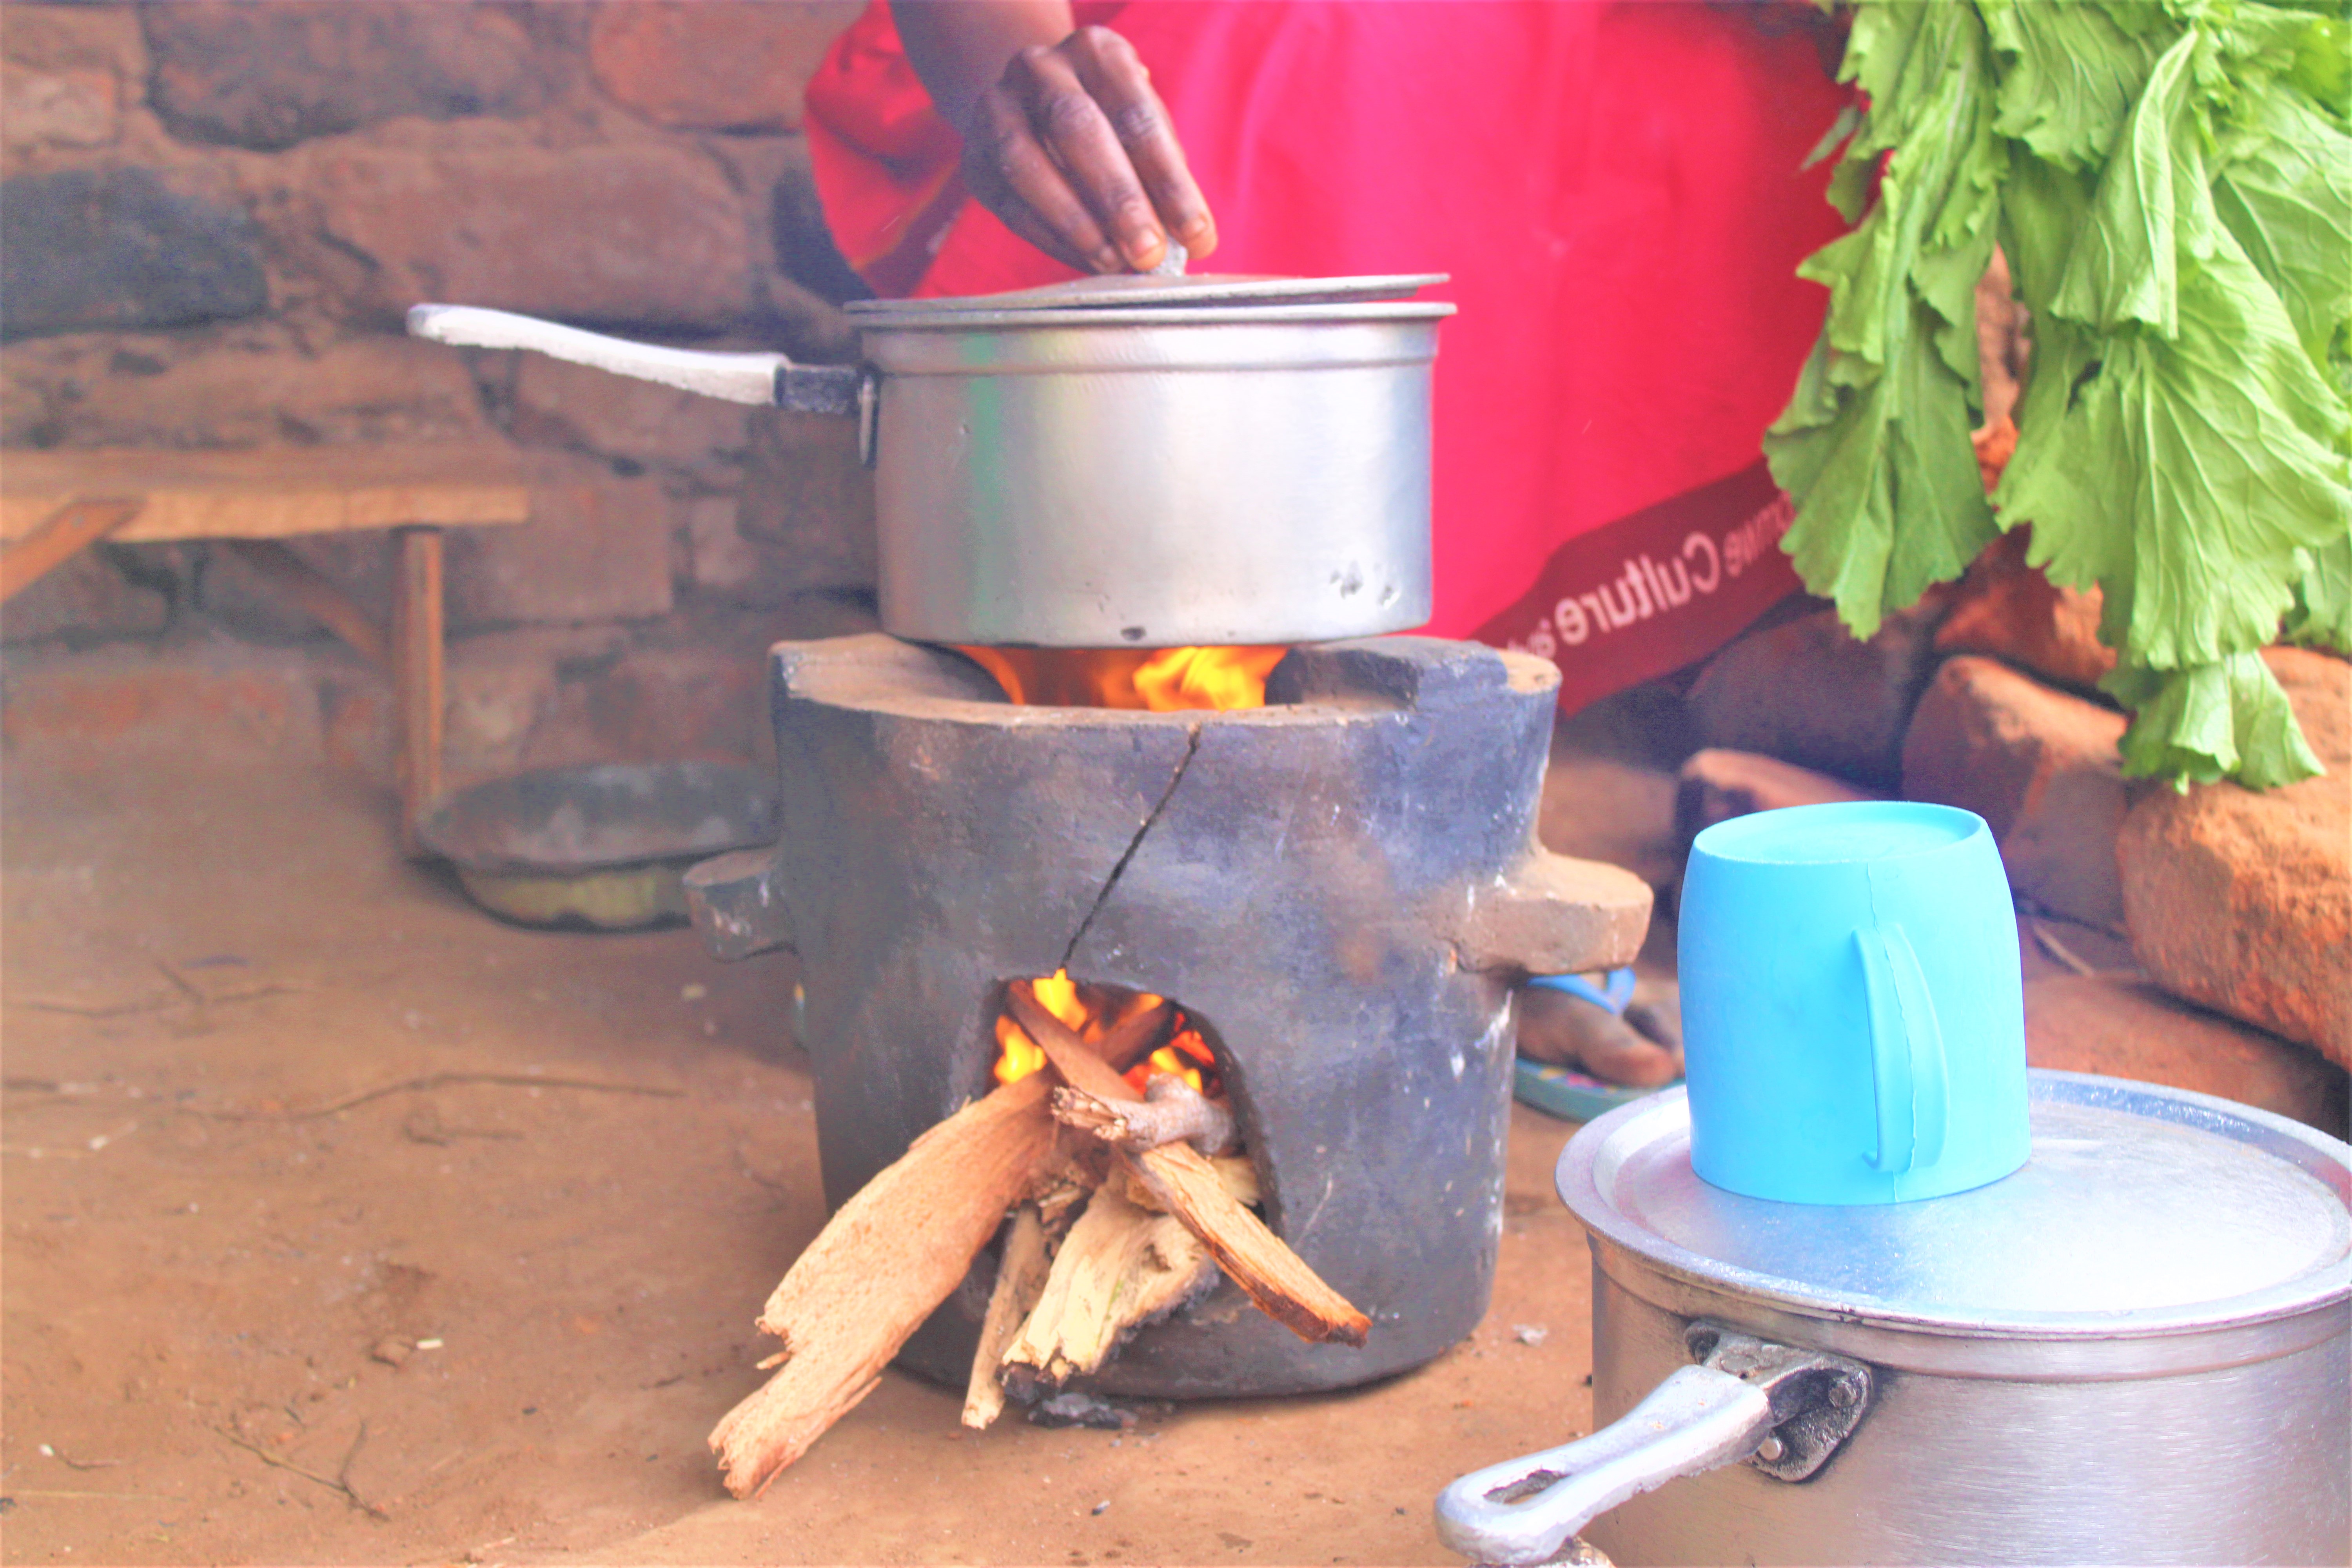 Cooking using Chitetezo fuel efficient cookstoves has proven key to reducing pressure on trees. Credit: Felix Malamula (PRIDE)